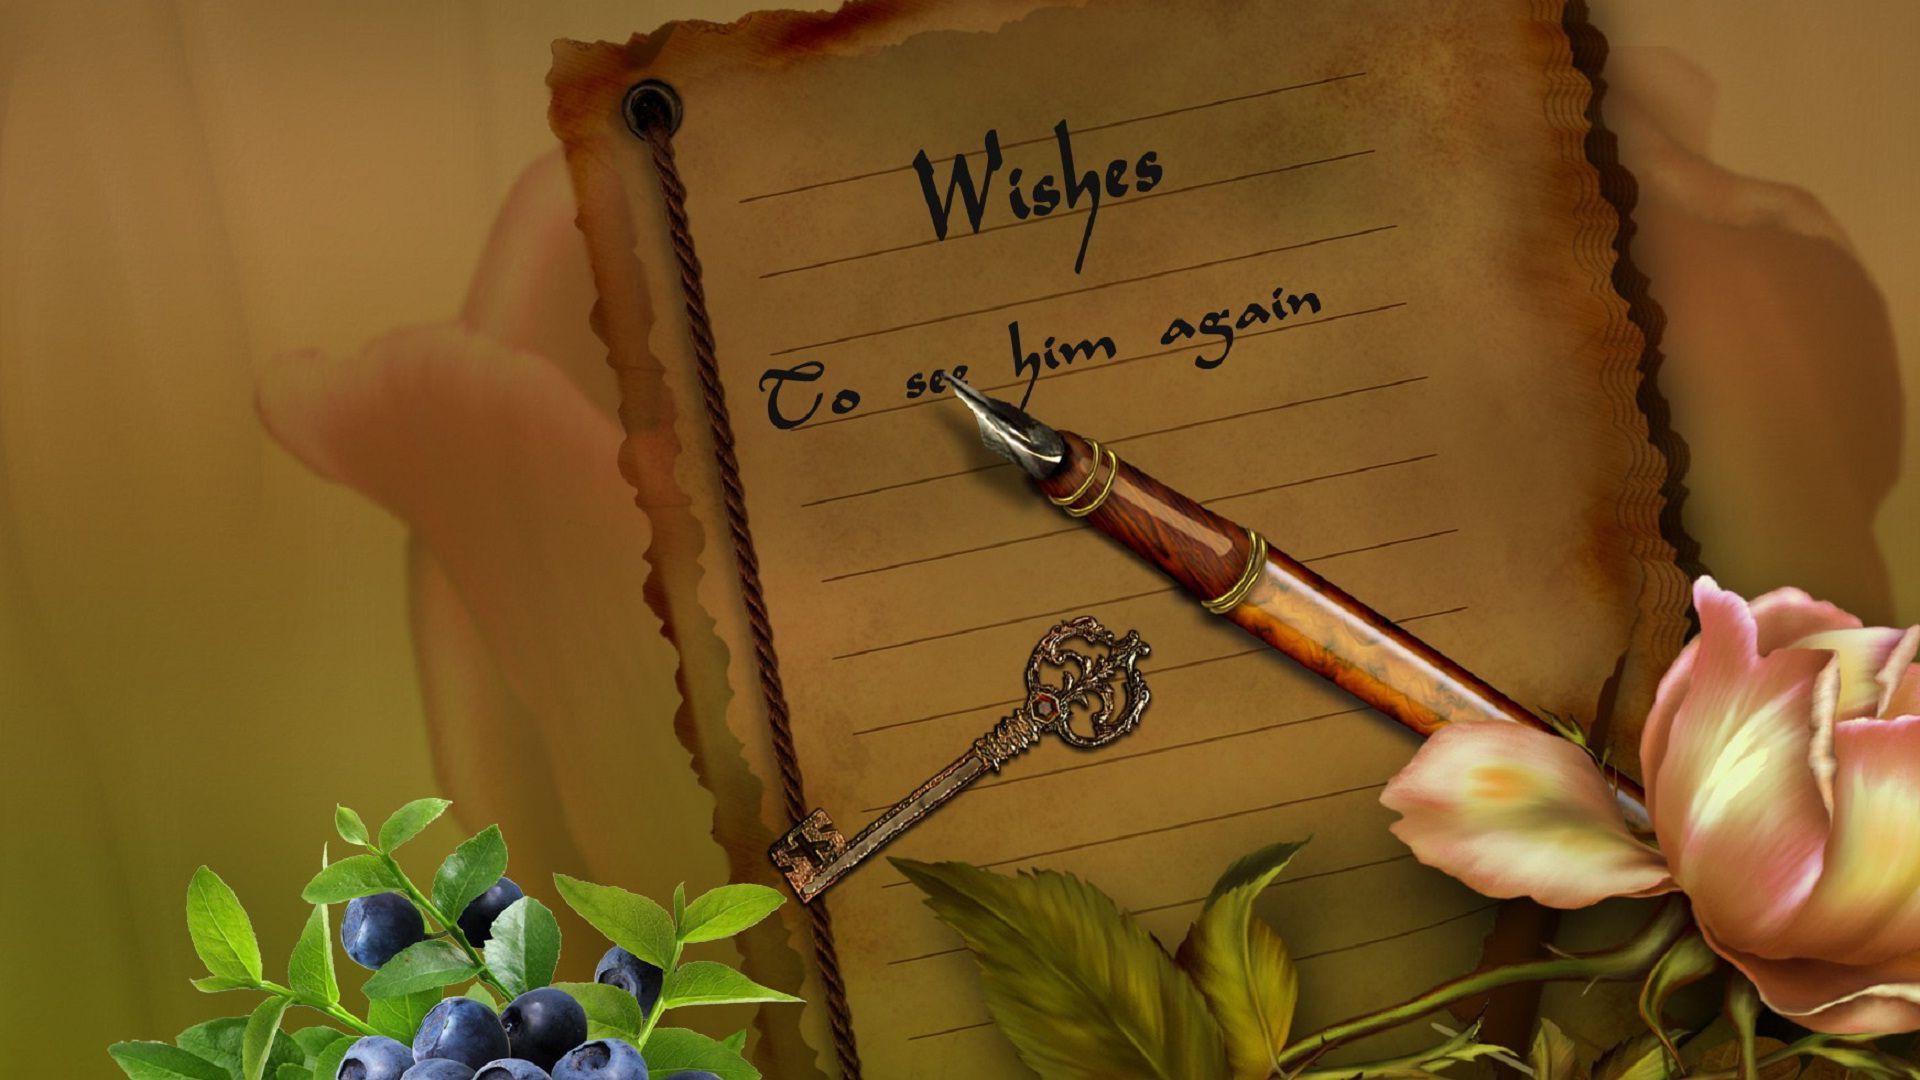 Best Wishes To See Him Again Card And Frames HD Wallpaper